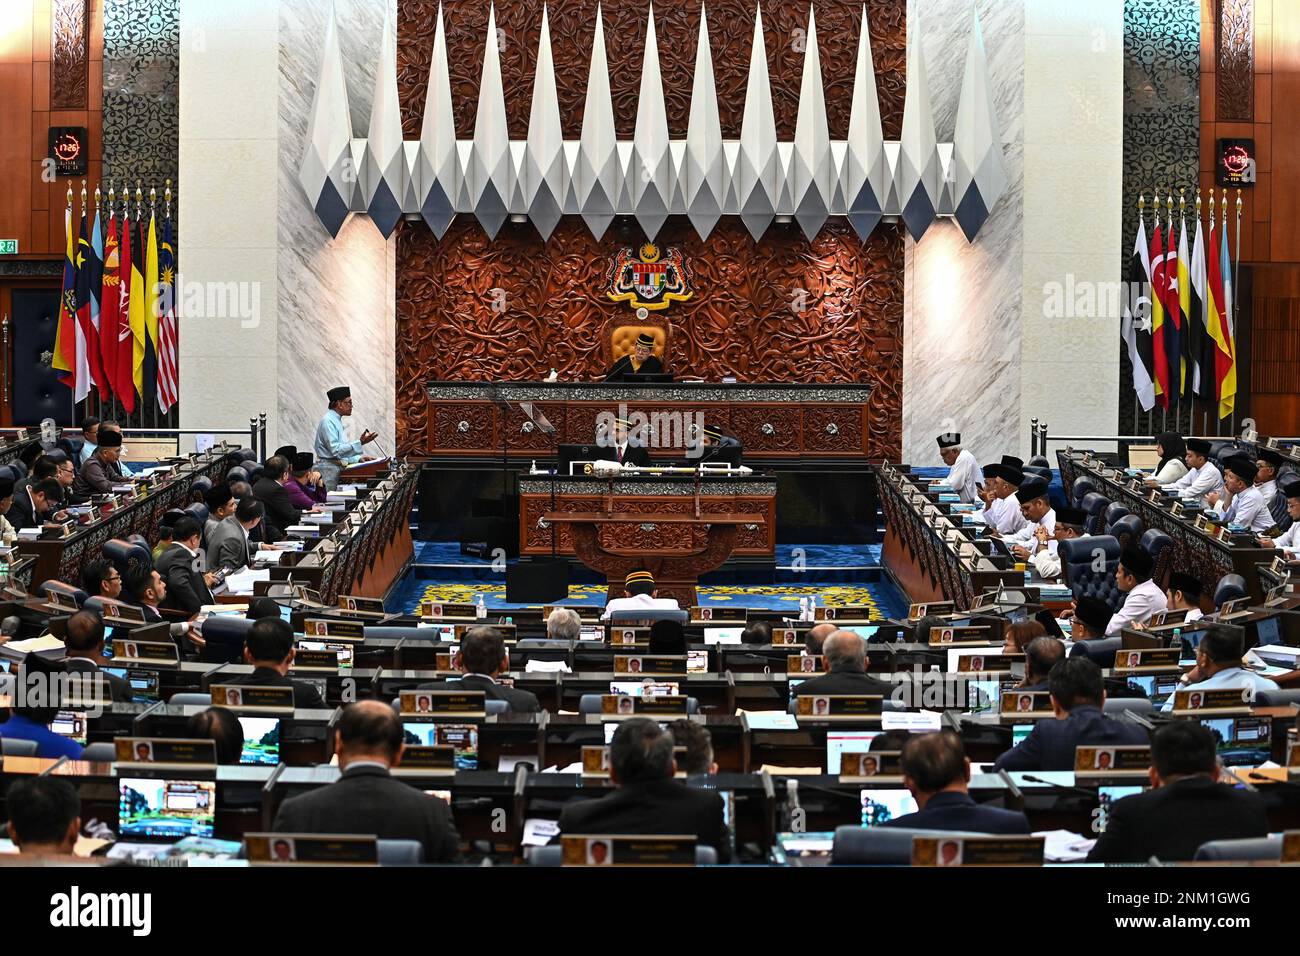 (230224) -- KUALA LUMPUR, Feb. 24, 2023 (Xinhua) -- Malaysian Prime Minister Anwar Ibrahim proposes the national budget at the parliament house in Kuala Lumpur, Malaysia, Feb. 24, 2023. The Malaysian government led by Prime Minister Anwar Ibrahim on Friday proposed a 388.1 billion ringgit (87.5 billion U.S. dollars) national budget aimed at helping the country resolve a number of domestic issues. Anwar, who is also the finance minister, said the budget will focus on addressing the high cost of living, further strengthening the social safety net and enhancing the micro, small and medium enter Stock Photo